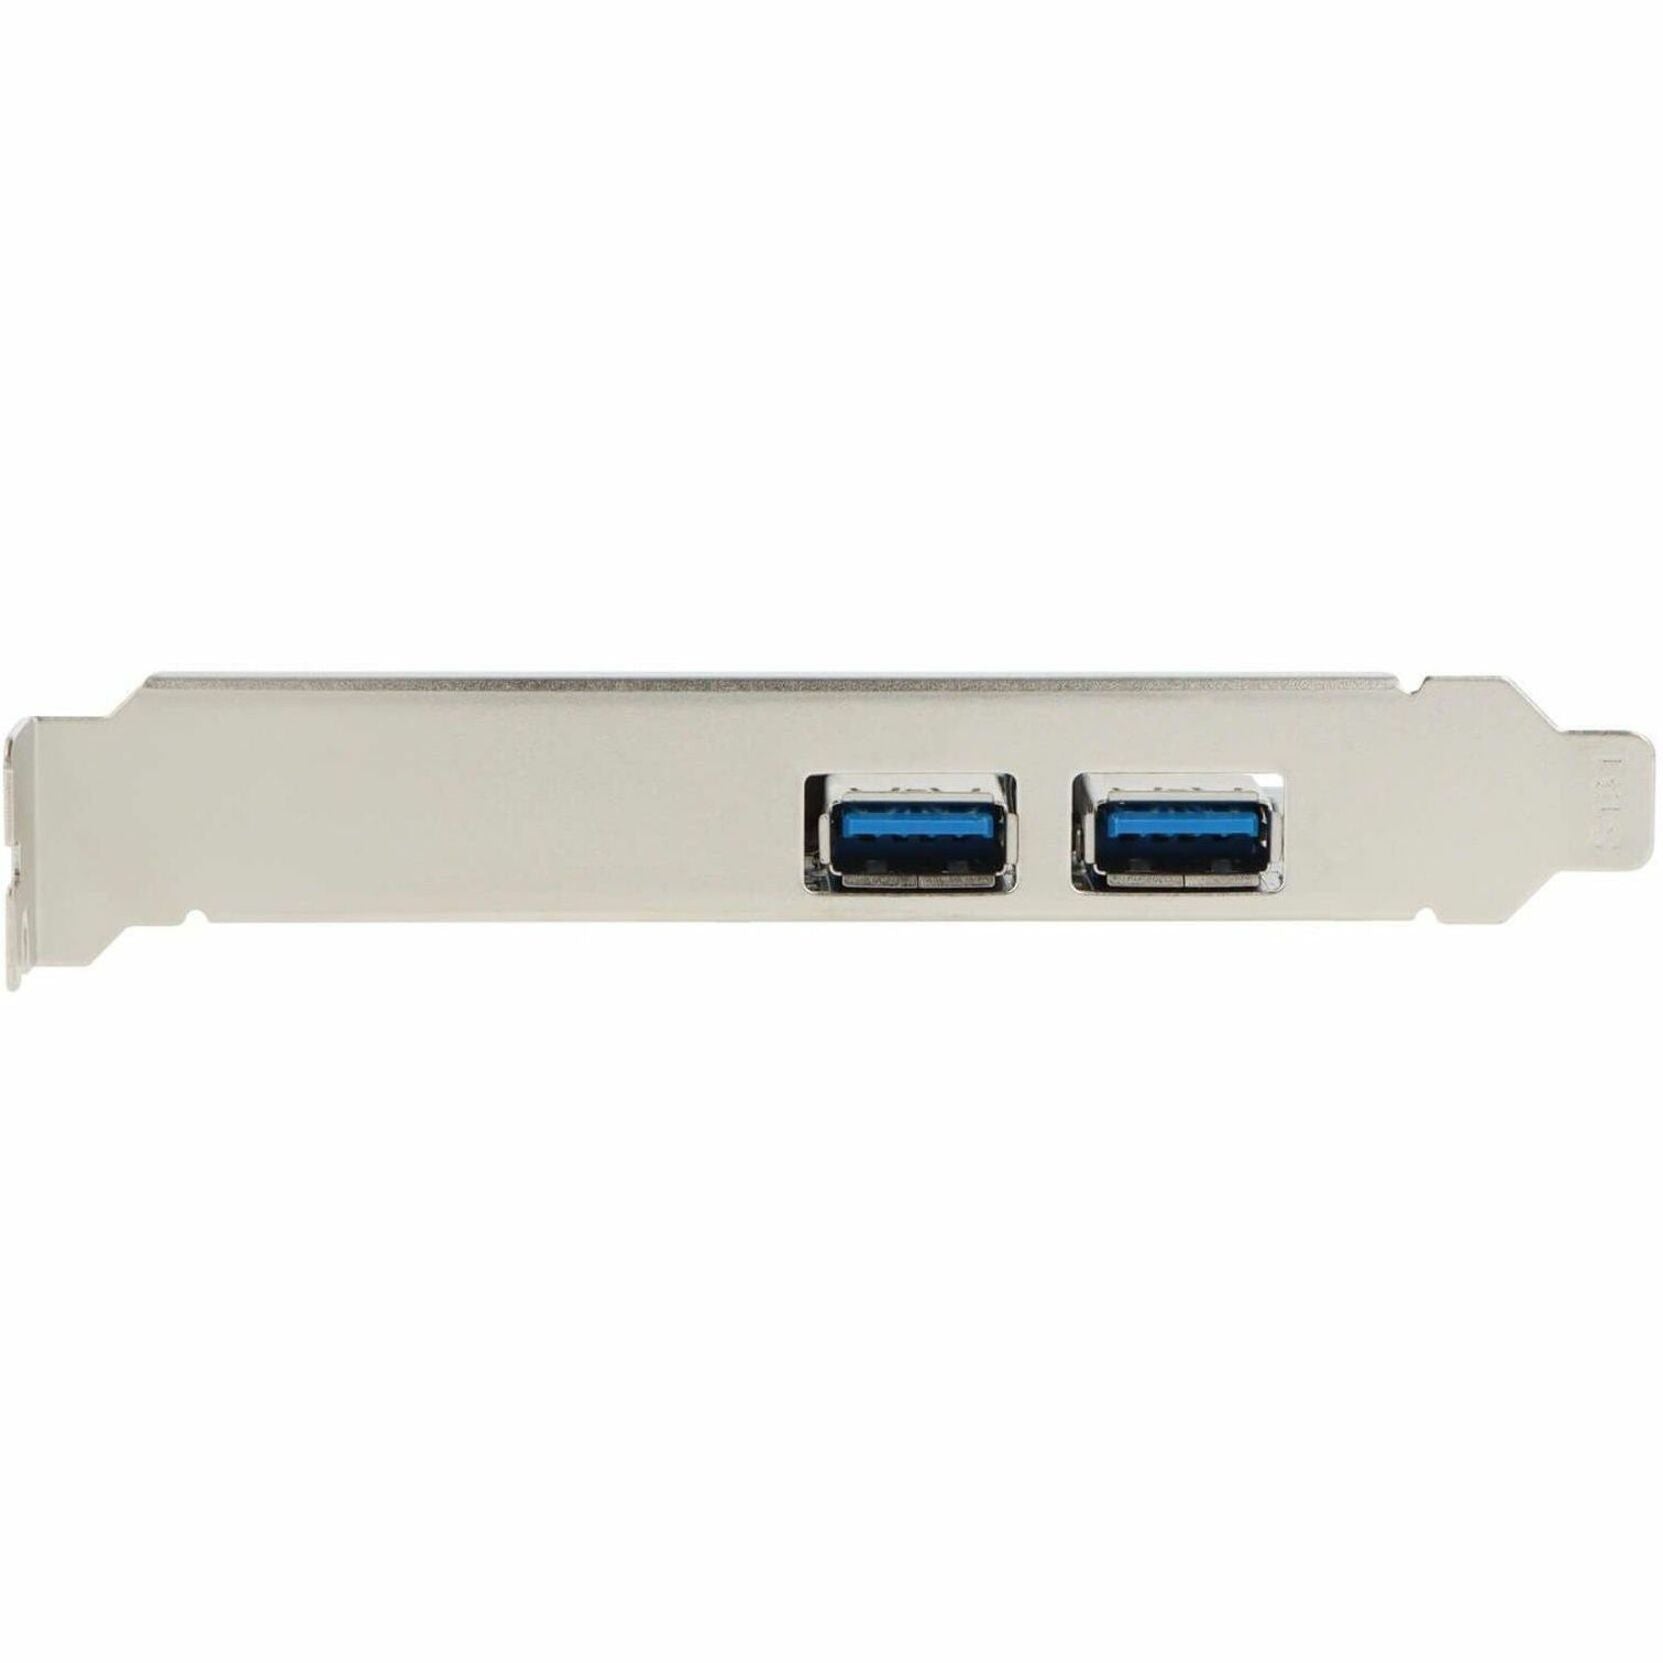 VisionTek 900598 USB 3.0 PCIe Expansion Card 2-port, Enhance Your PC with High-Speed USB Connectivity